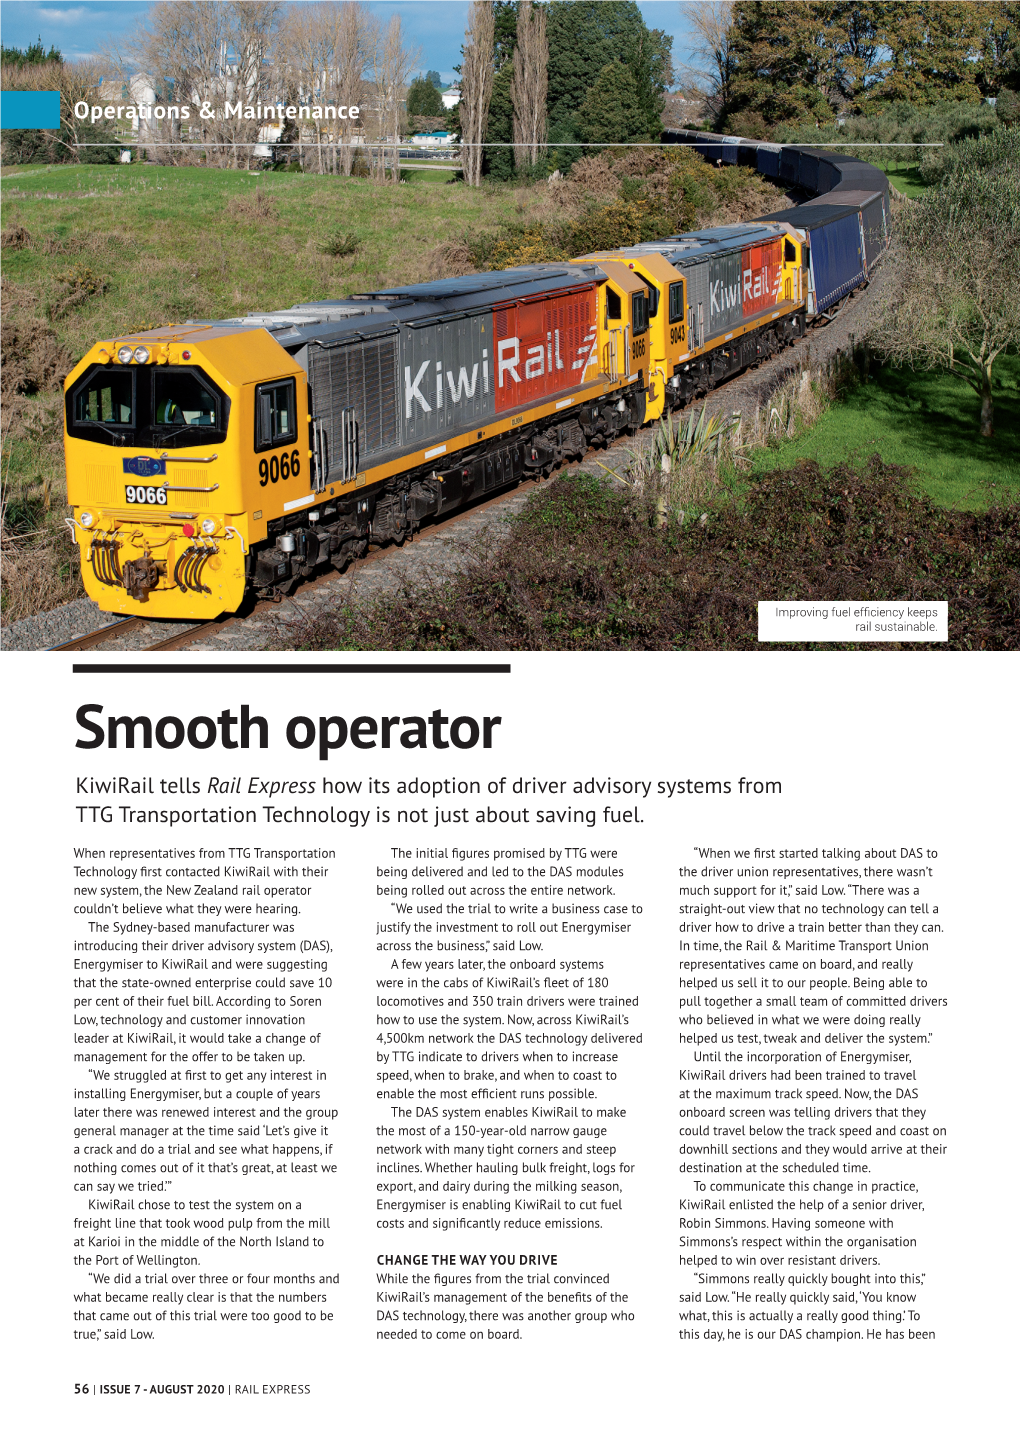 Smooth Operator Kiwirail Tells Rail Express How Its Adoption of Driver Advisory Systems from TTG Transportation Technology Is Not Just About Saving Fuel